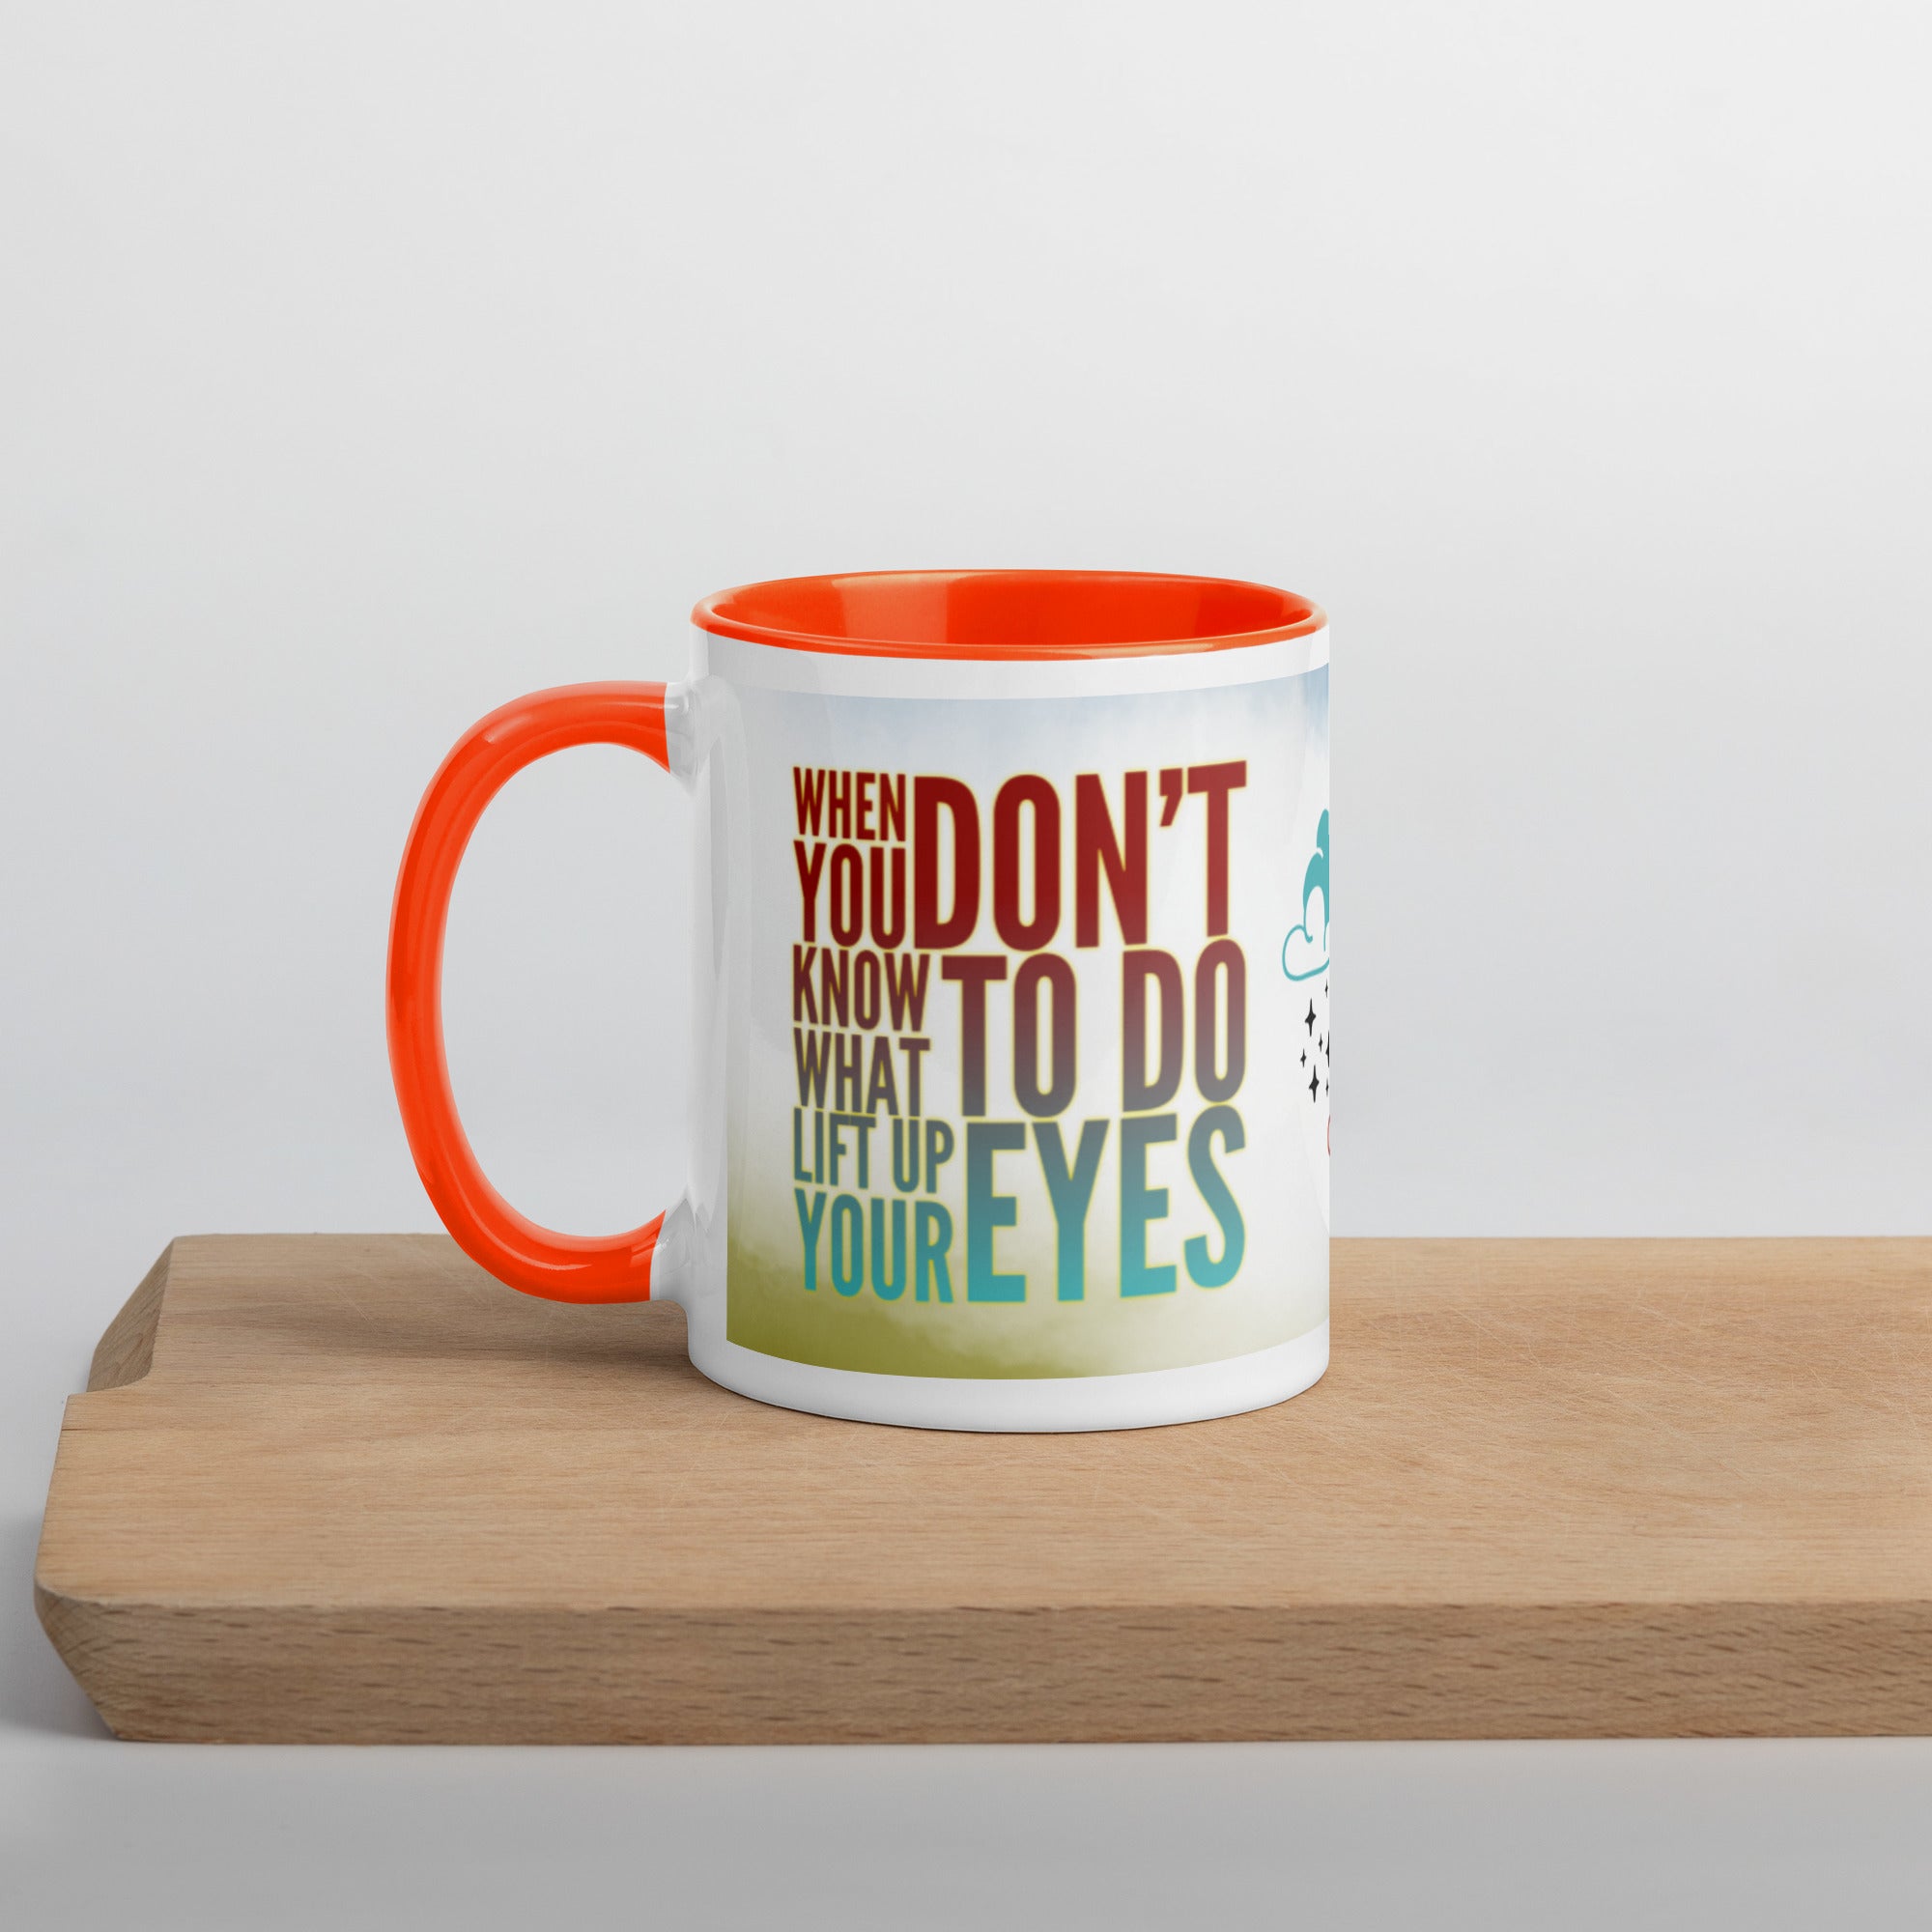 GloWell Designs - Mug with Color Inside - Motivational Quote - Lift Up Your Eyes - GloWell Designs